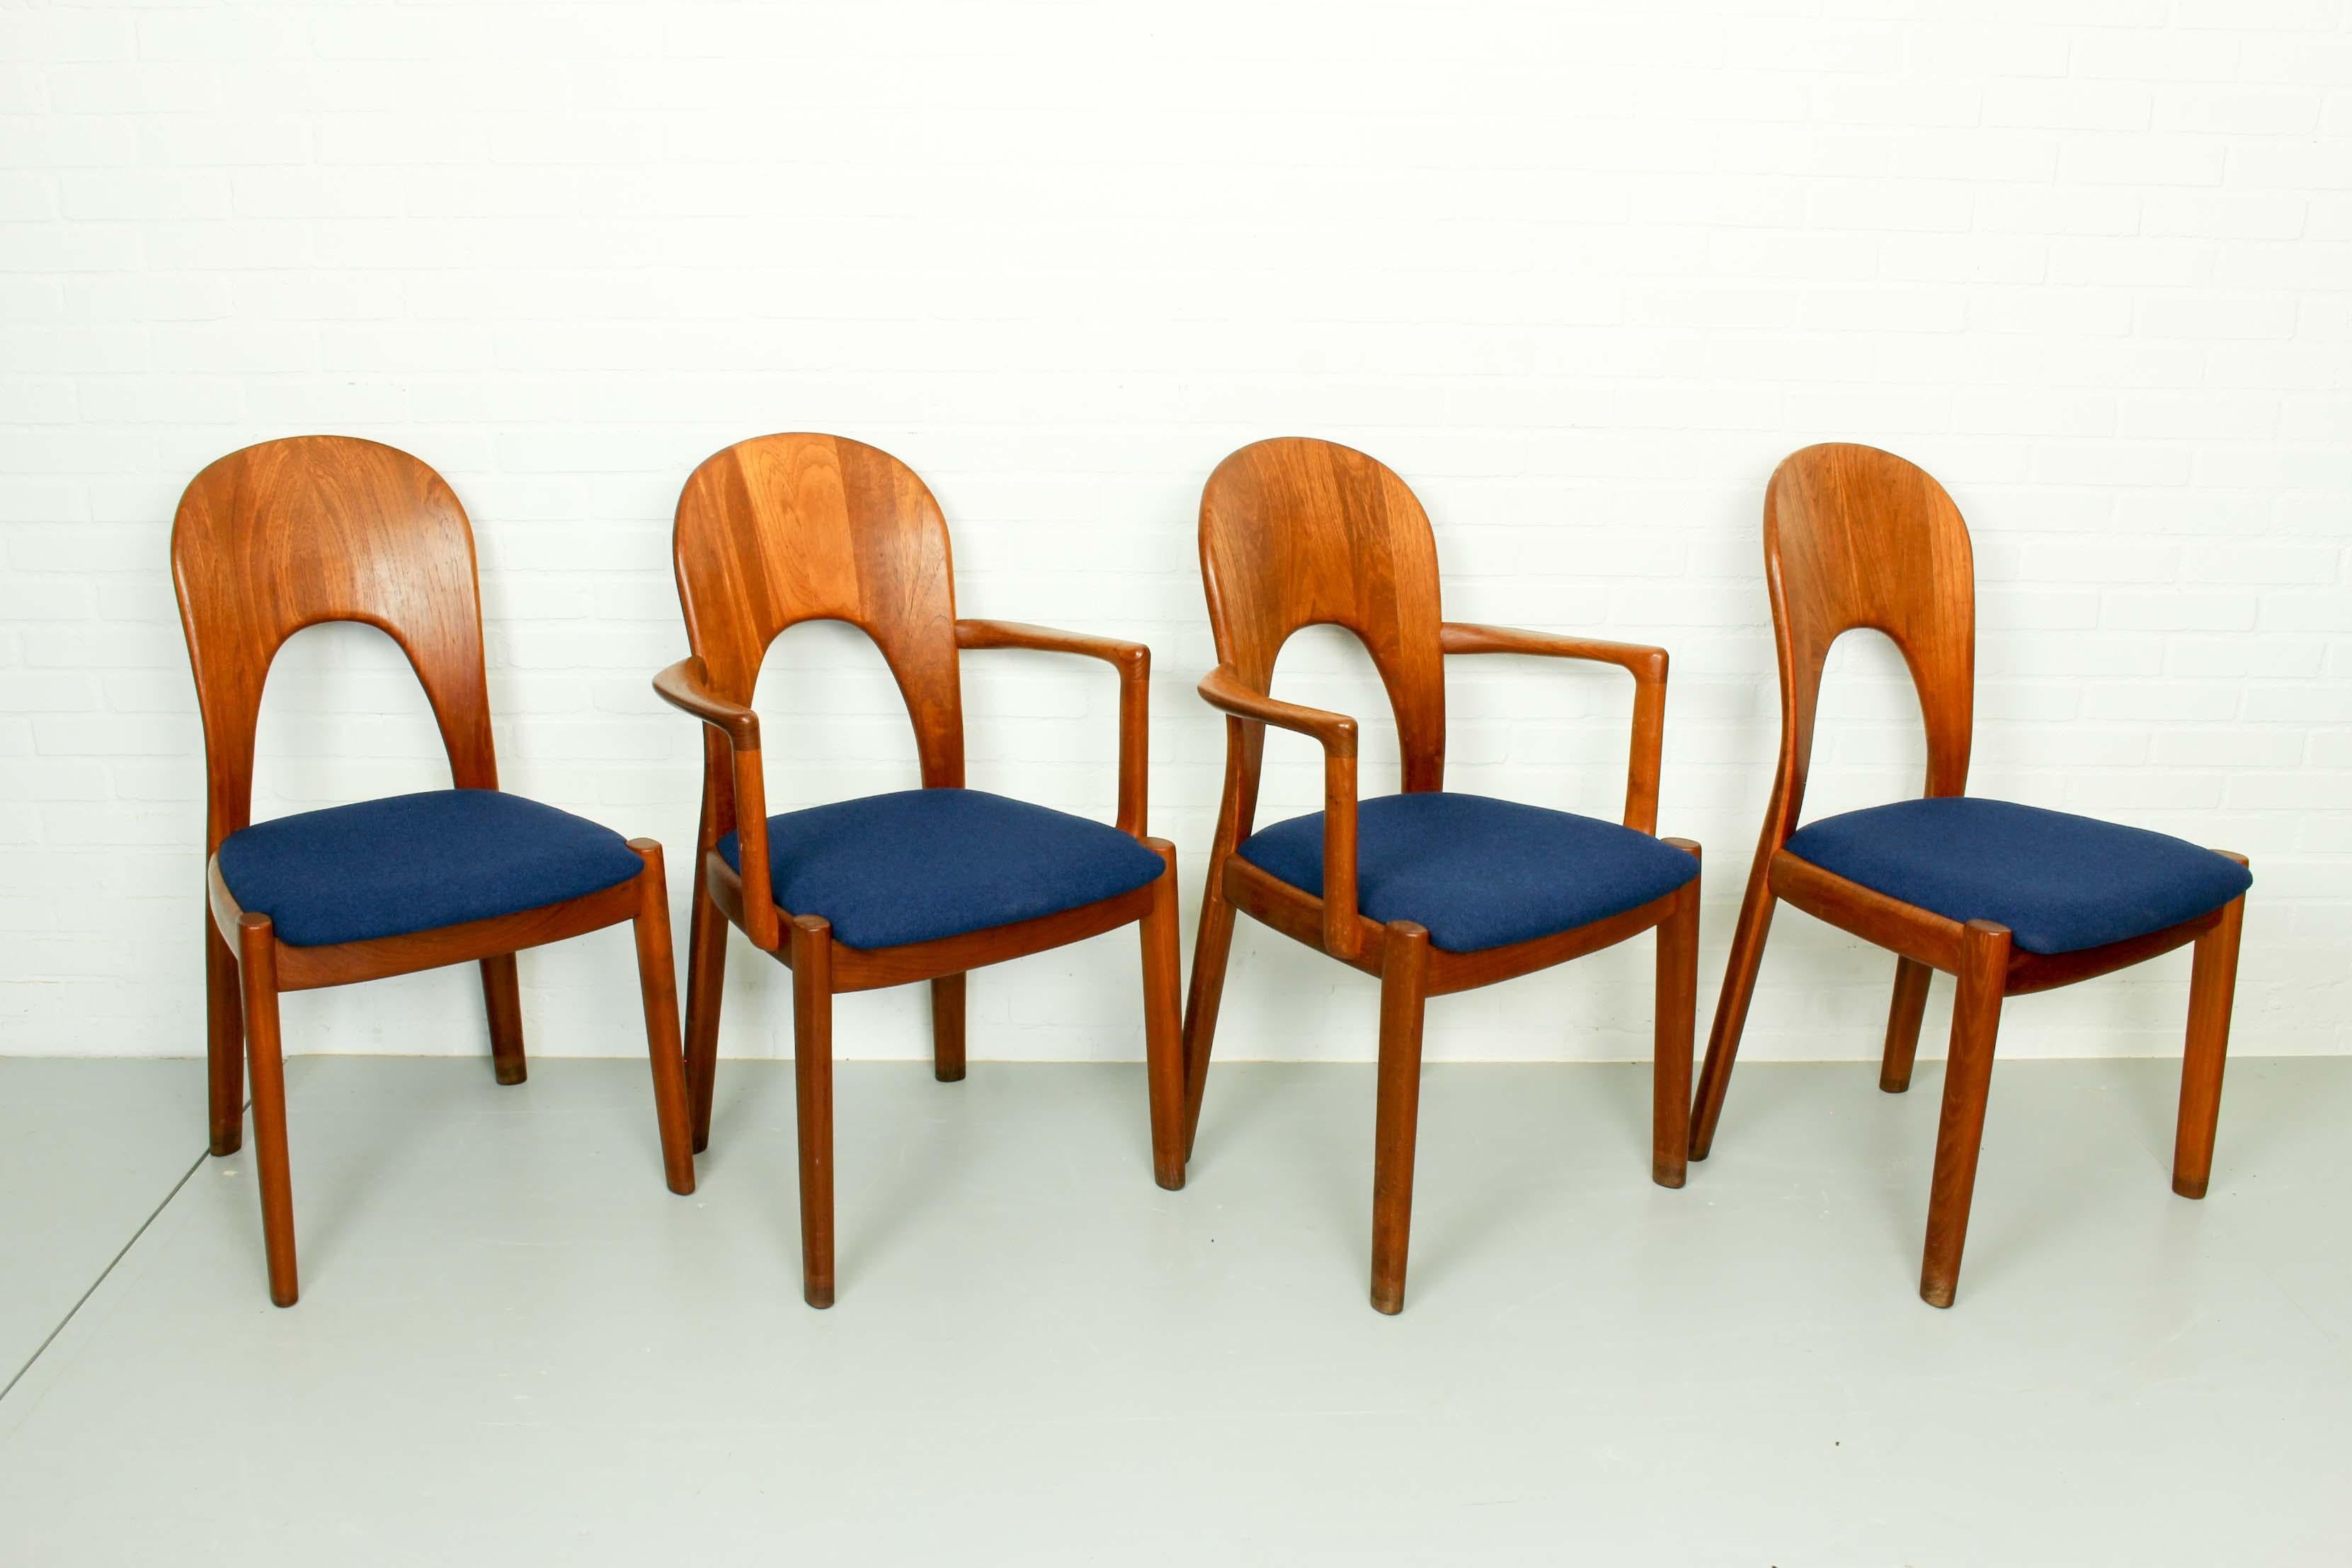 Midcentury Danish dining chairs model “Morten” designed by Niels Koefoed for Koefoeds Hornslet. The set was made in the 1960s. The chairs are in excellent condition with new Kvadrat Tonica upholstery. The chairs are solid teak throughout. Two chairs